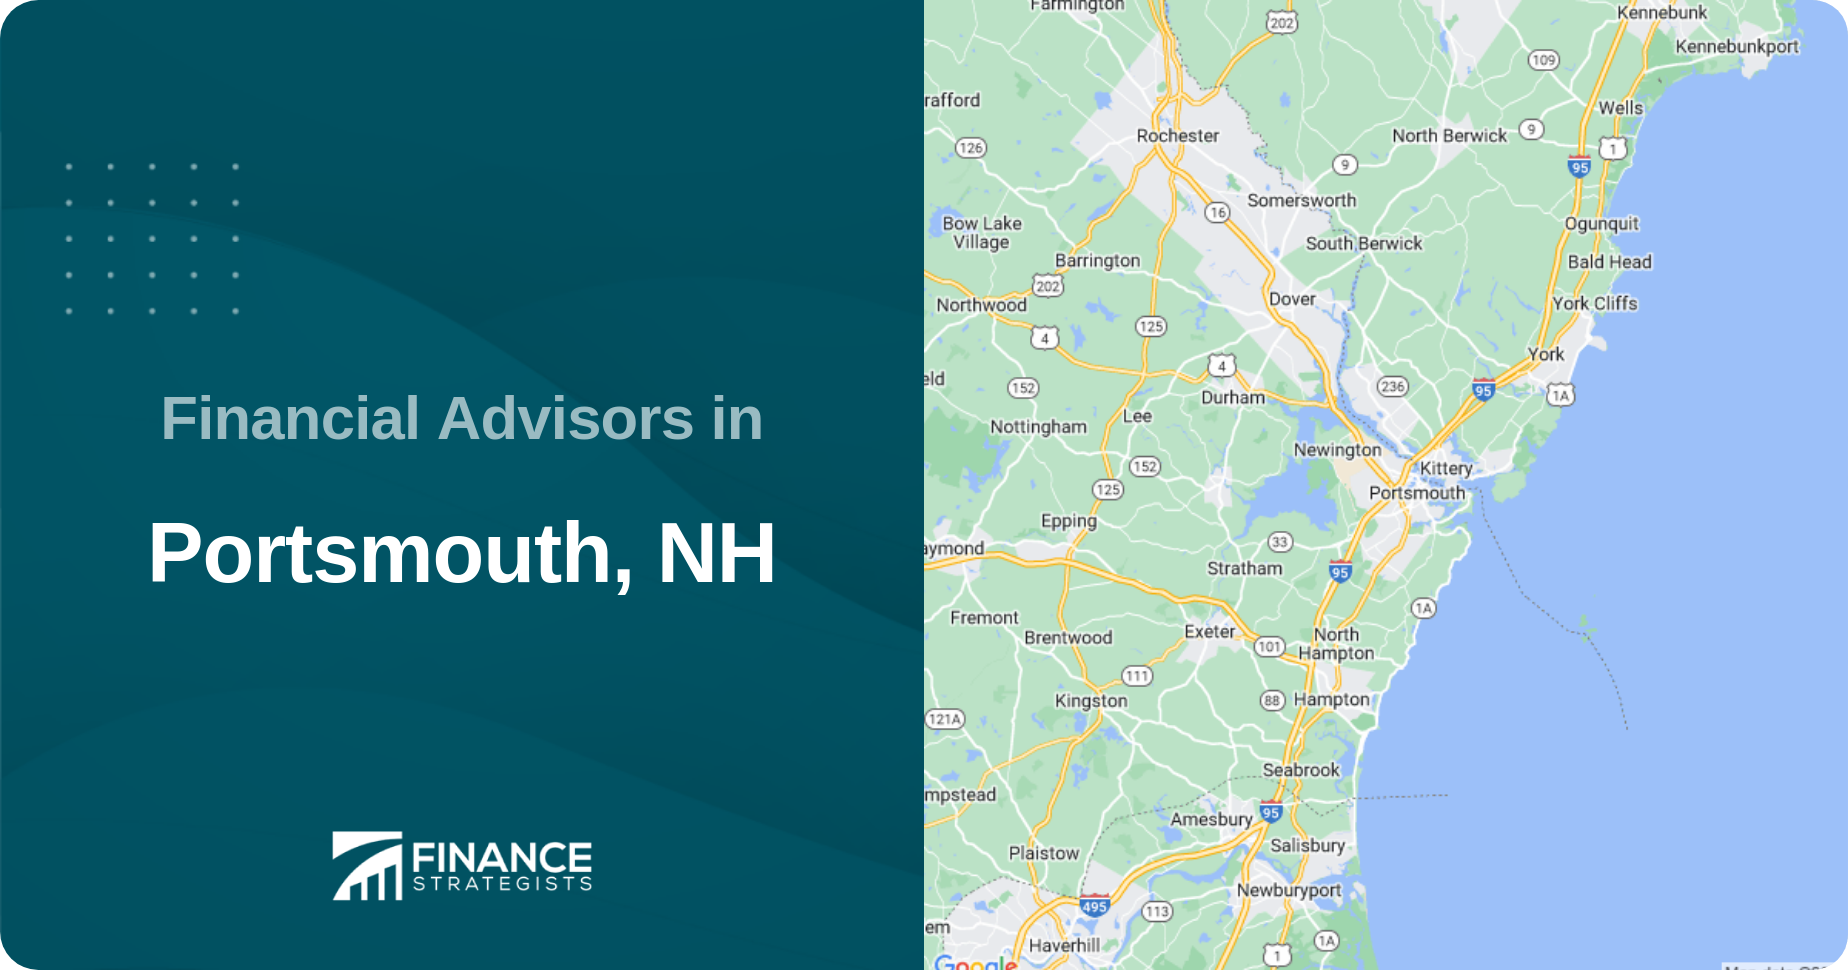 Financial Advisors in Portsmouth, NH